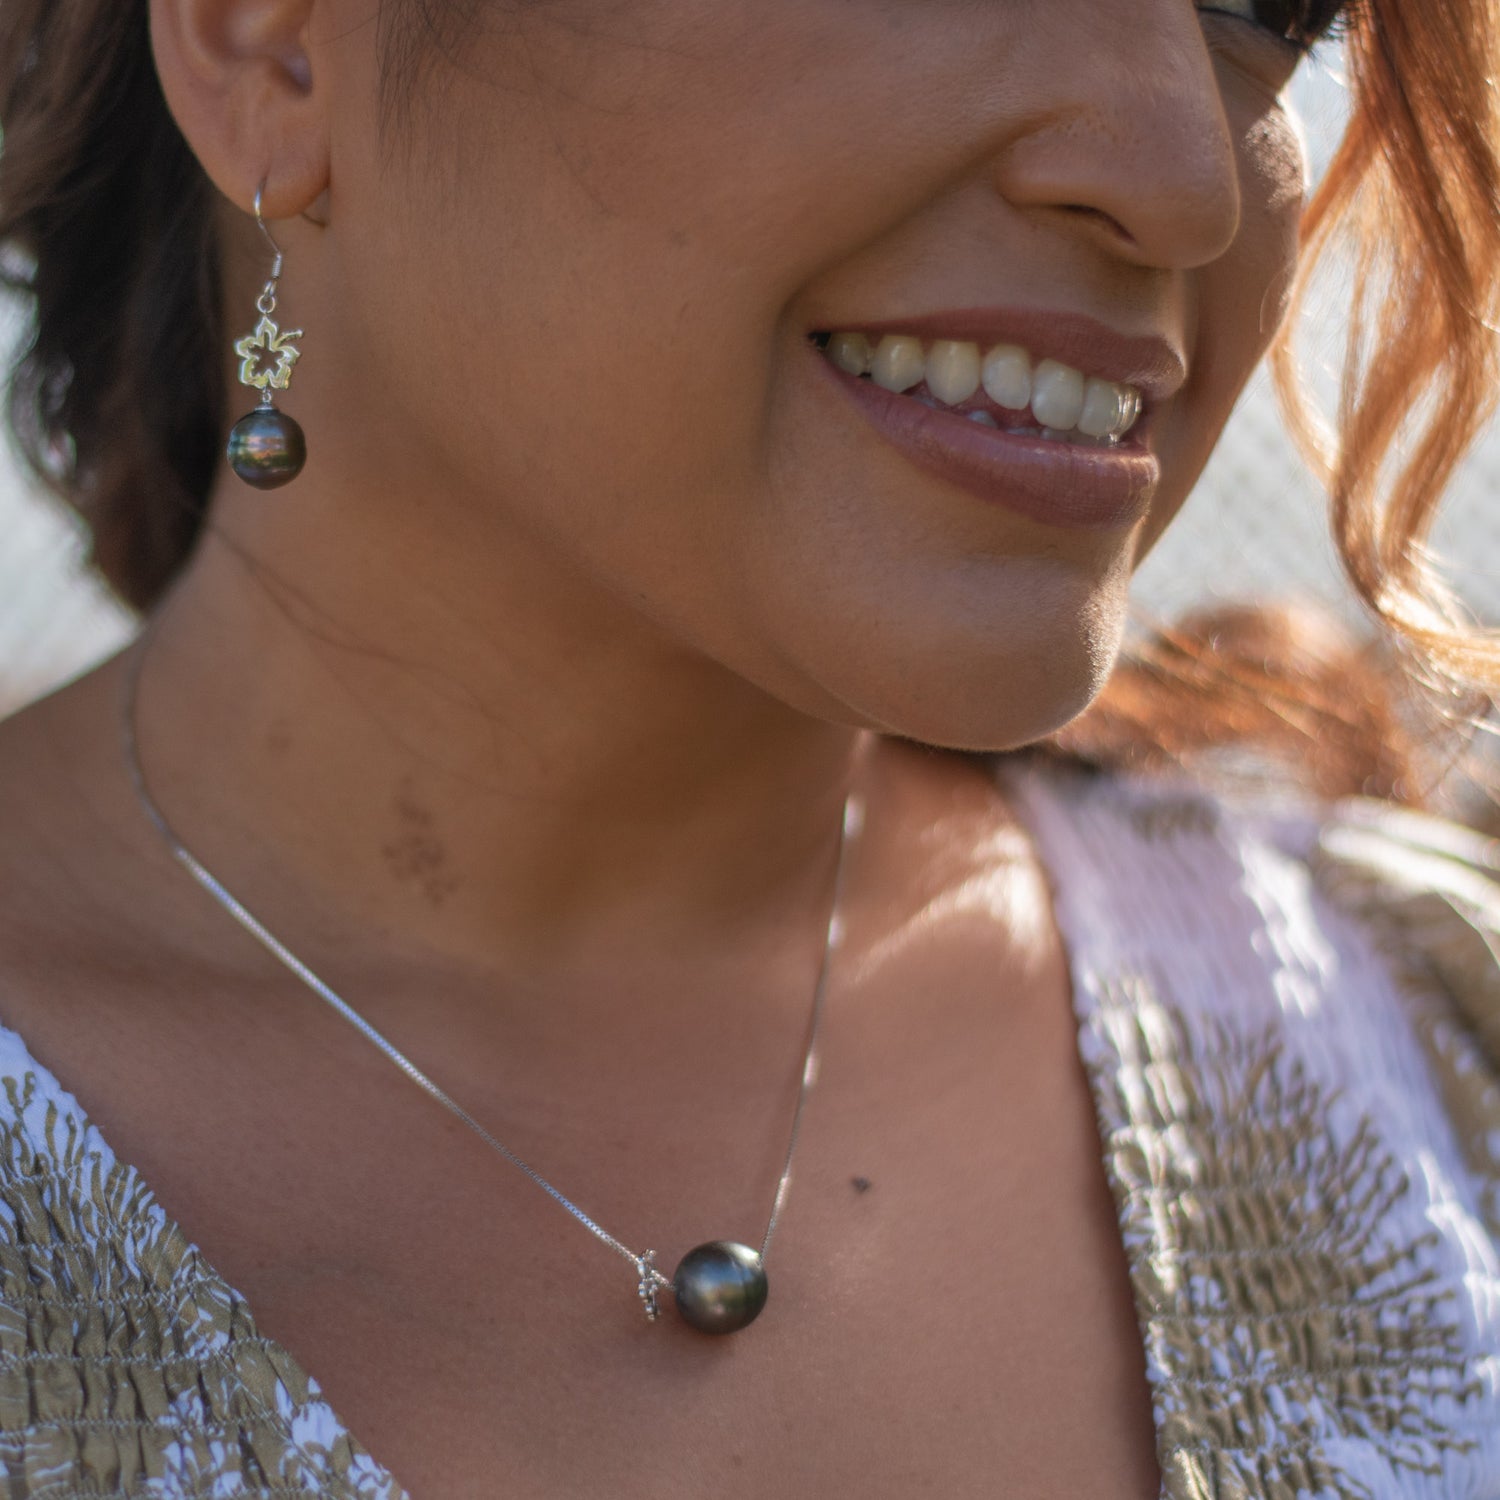 Ina Tahitian Pearl Fish Hook Earrings with Hibiscus Accent by Rosa